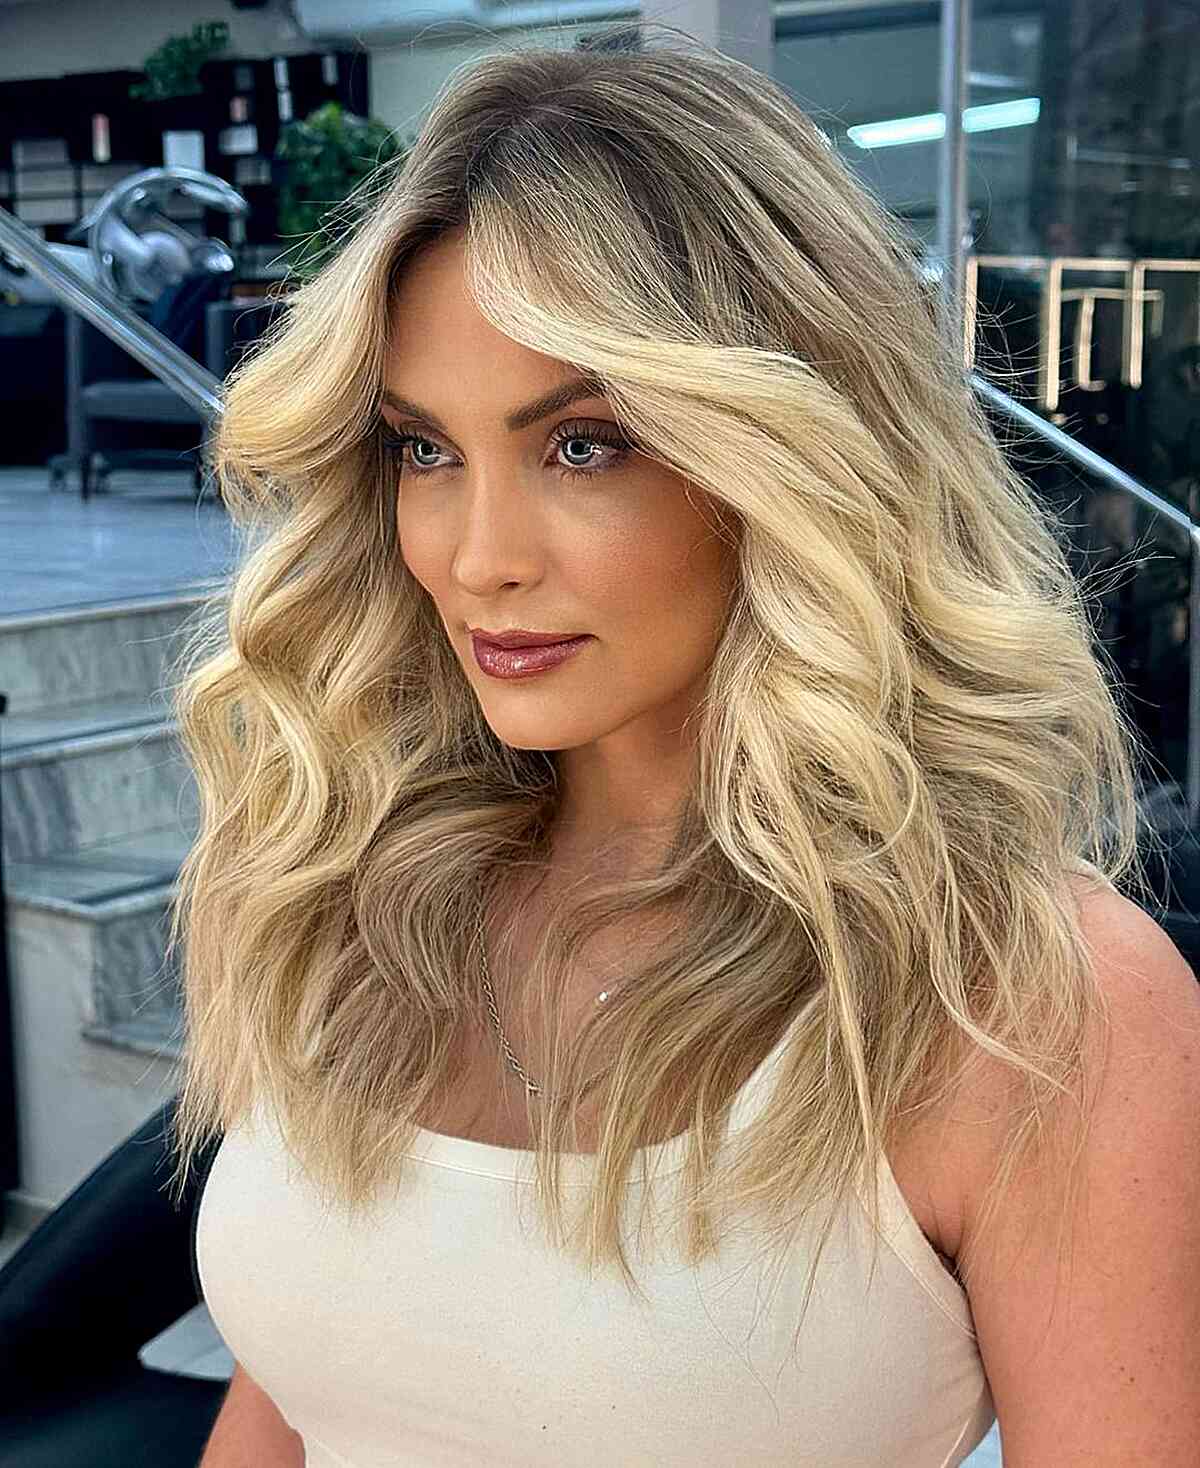 Hottest Full Blowout Hairstyle for women with longer thick hair